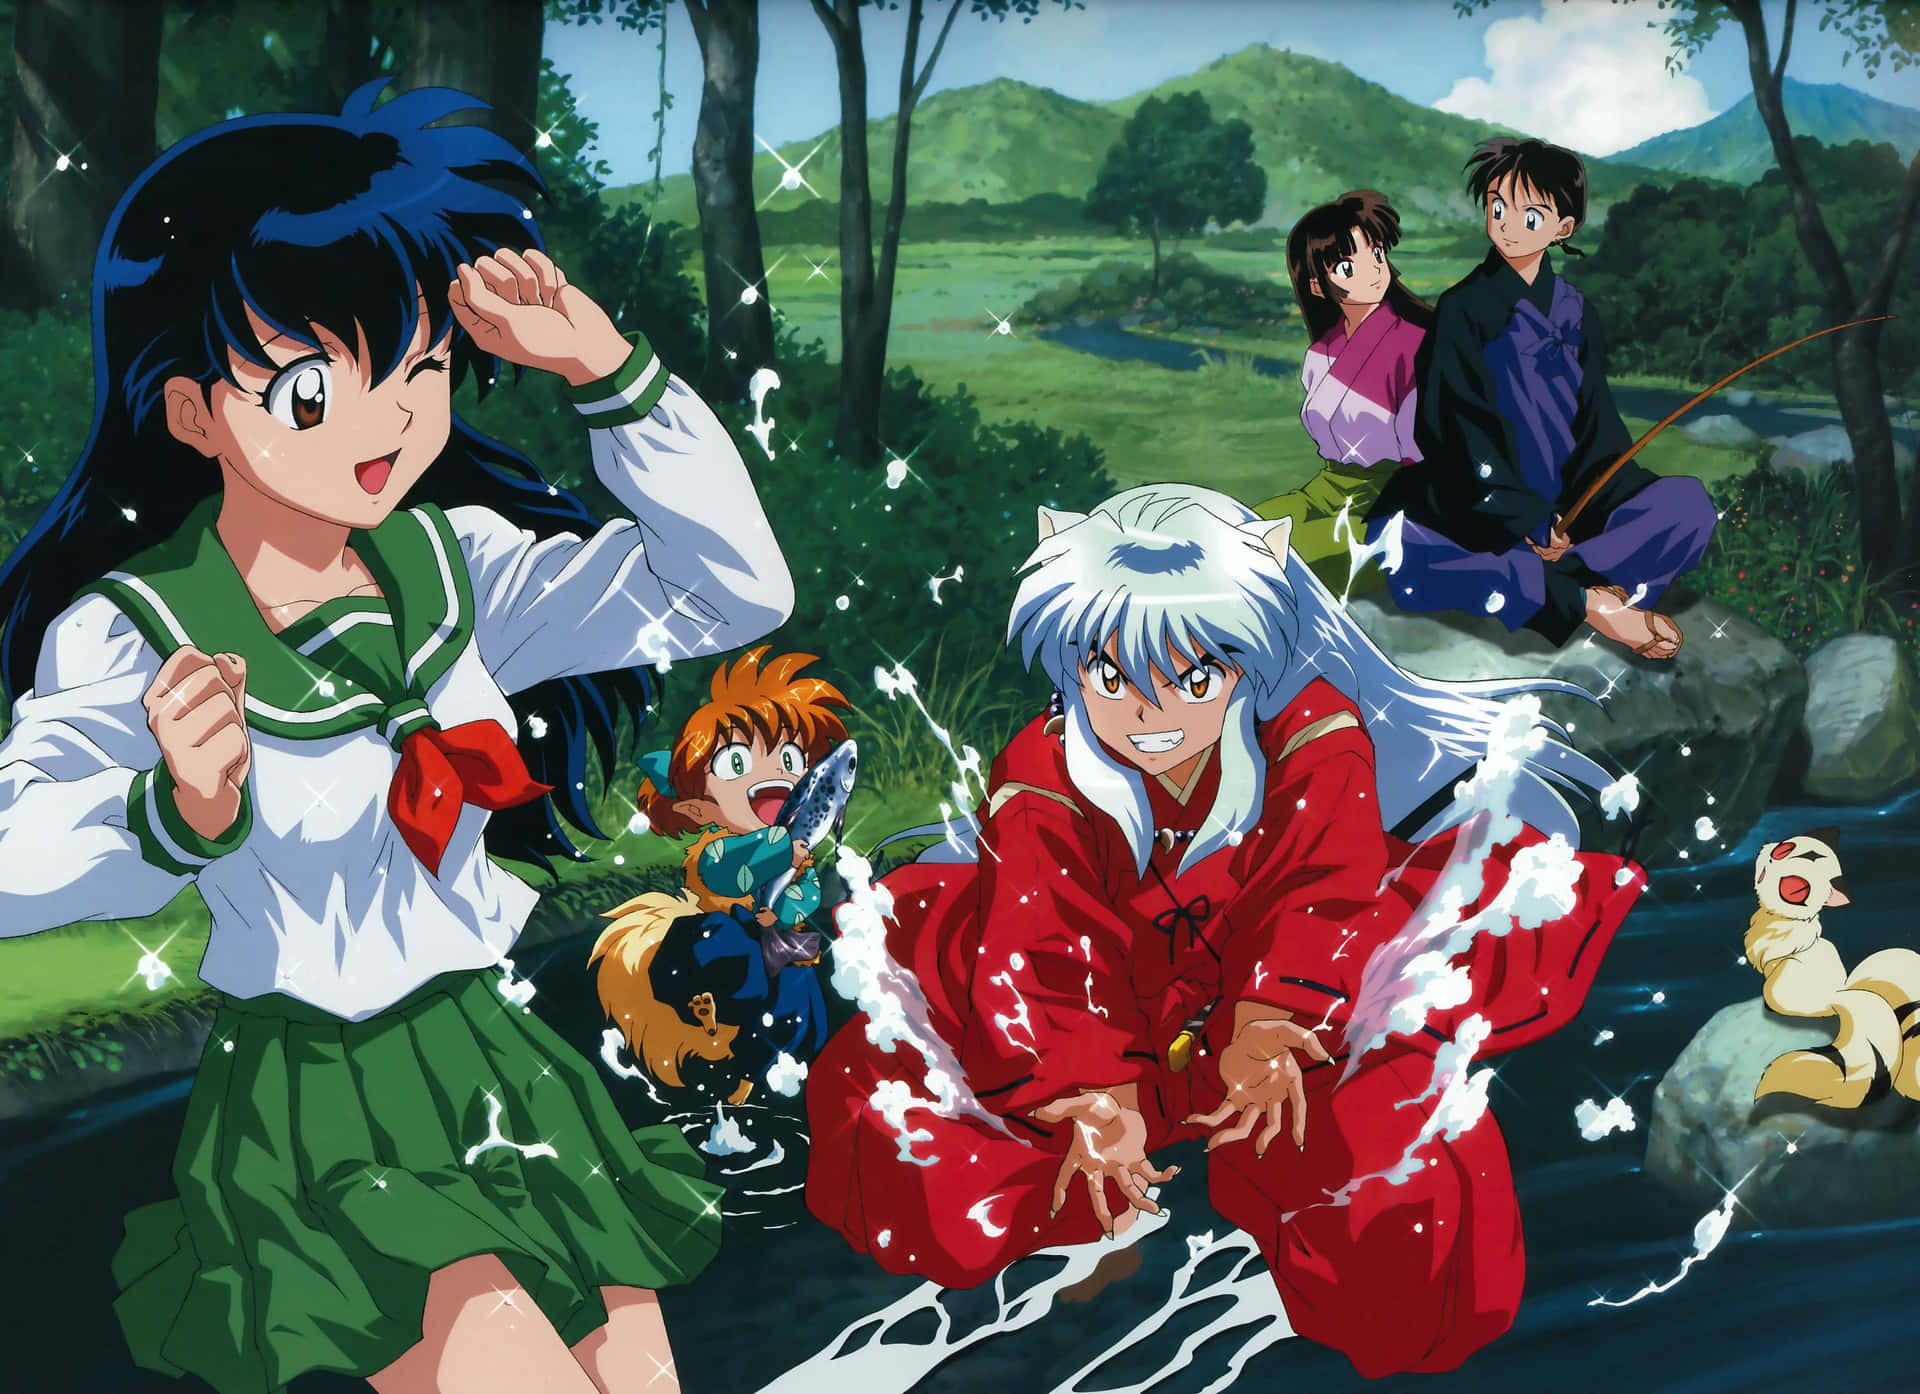 Slay the demons in Inuyasha!